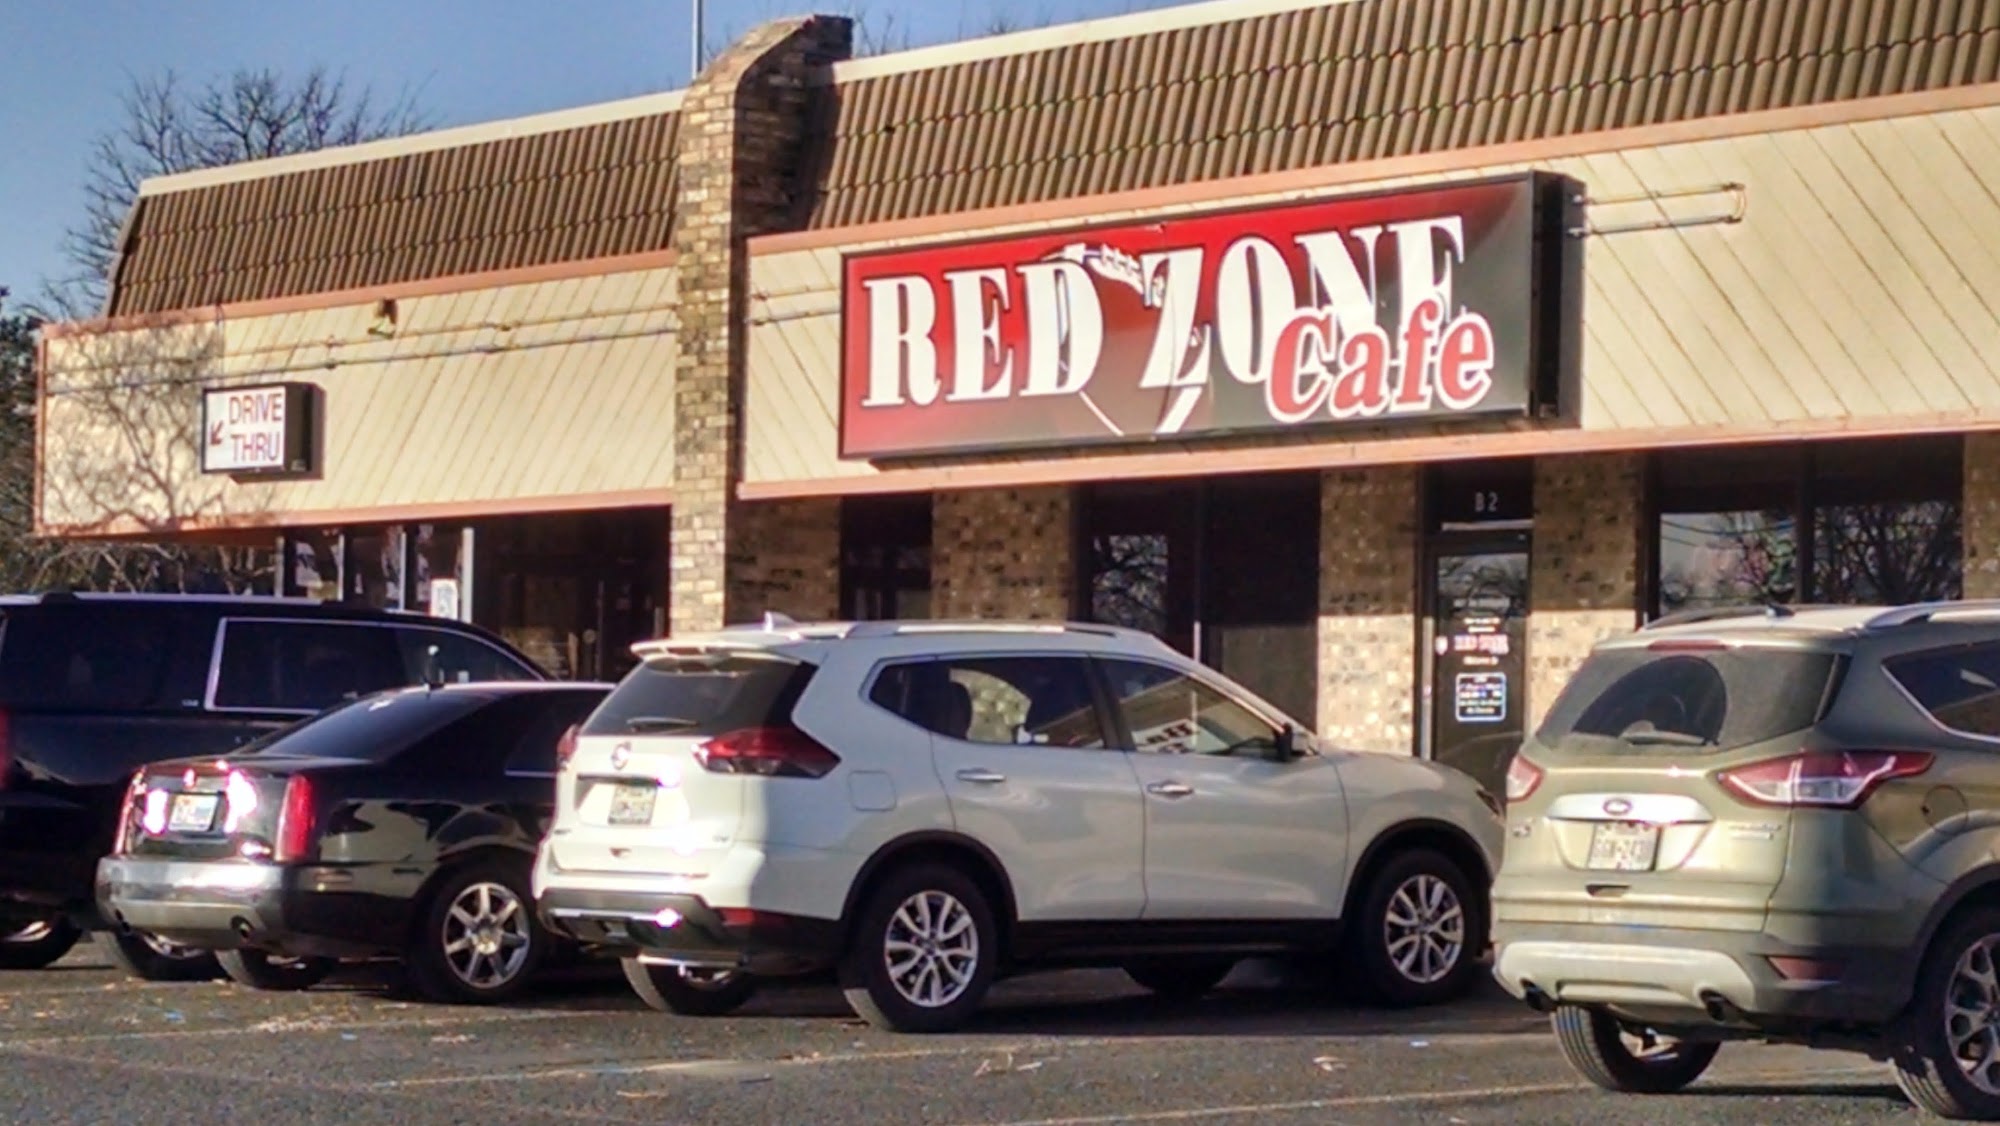 RED ZONE Cafe